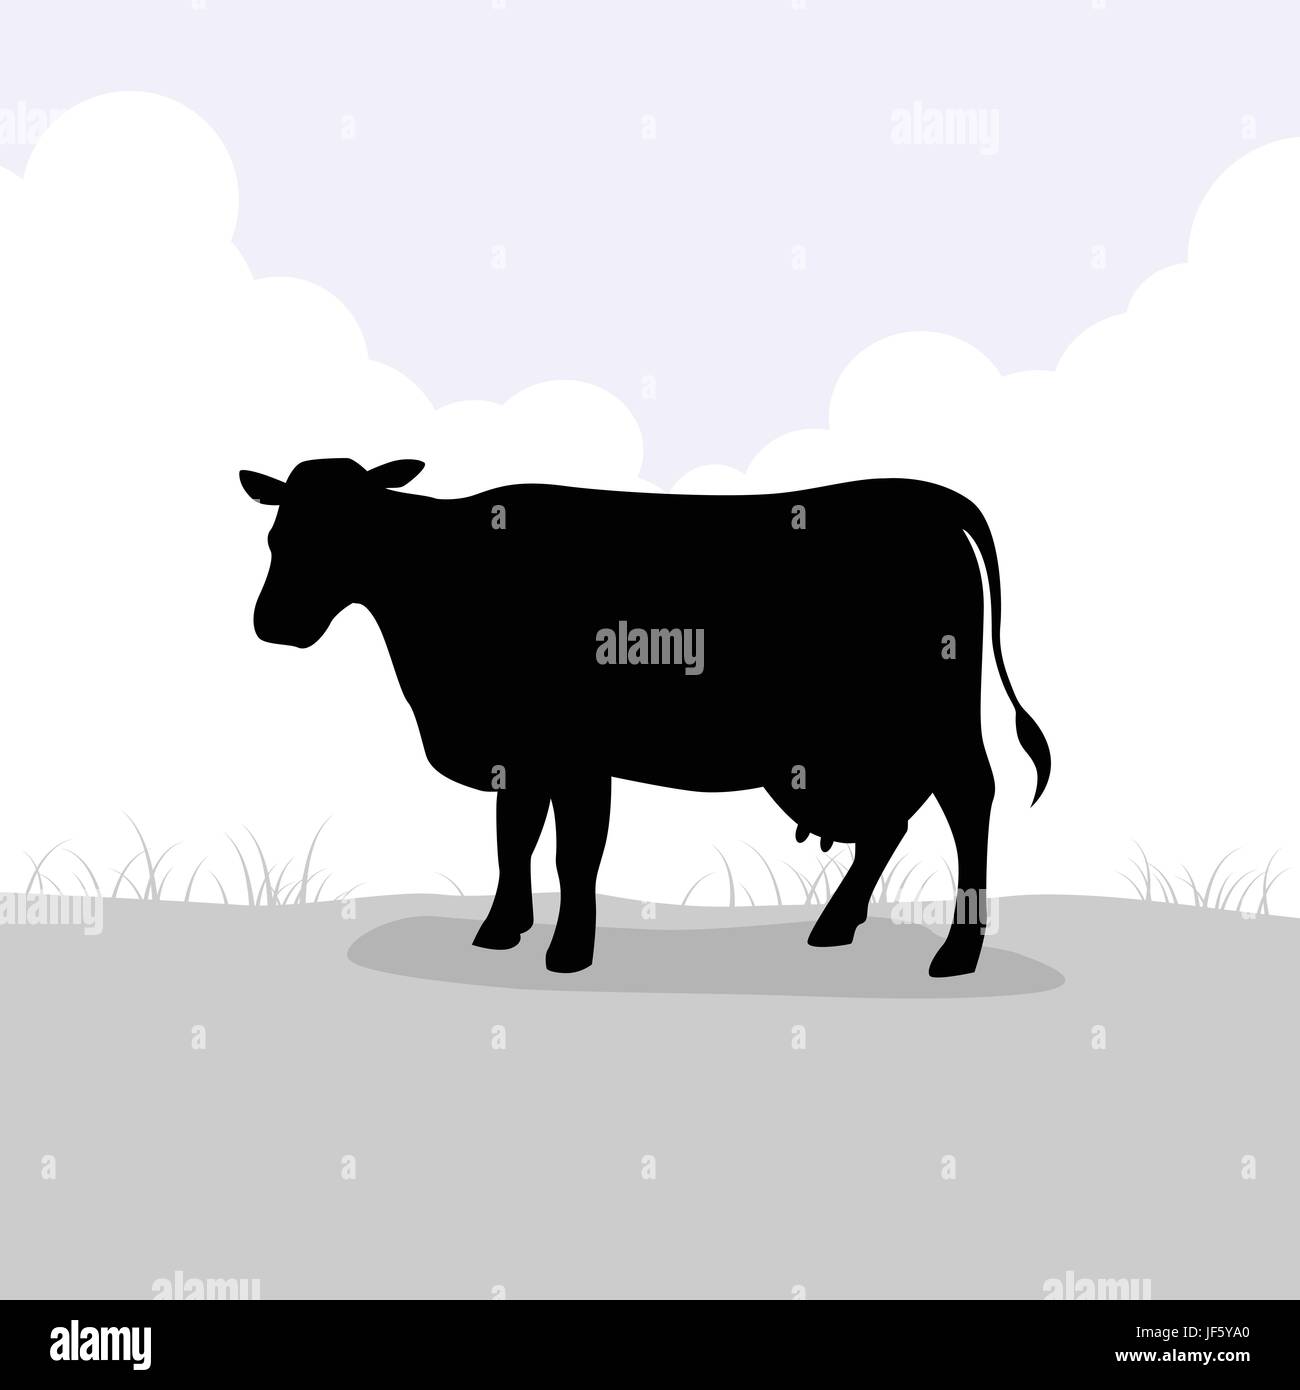 mammal, cow, silhouette, outline, cattle, farm animal, black and white, mammal, Stock Vector